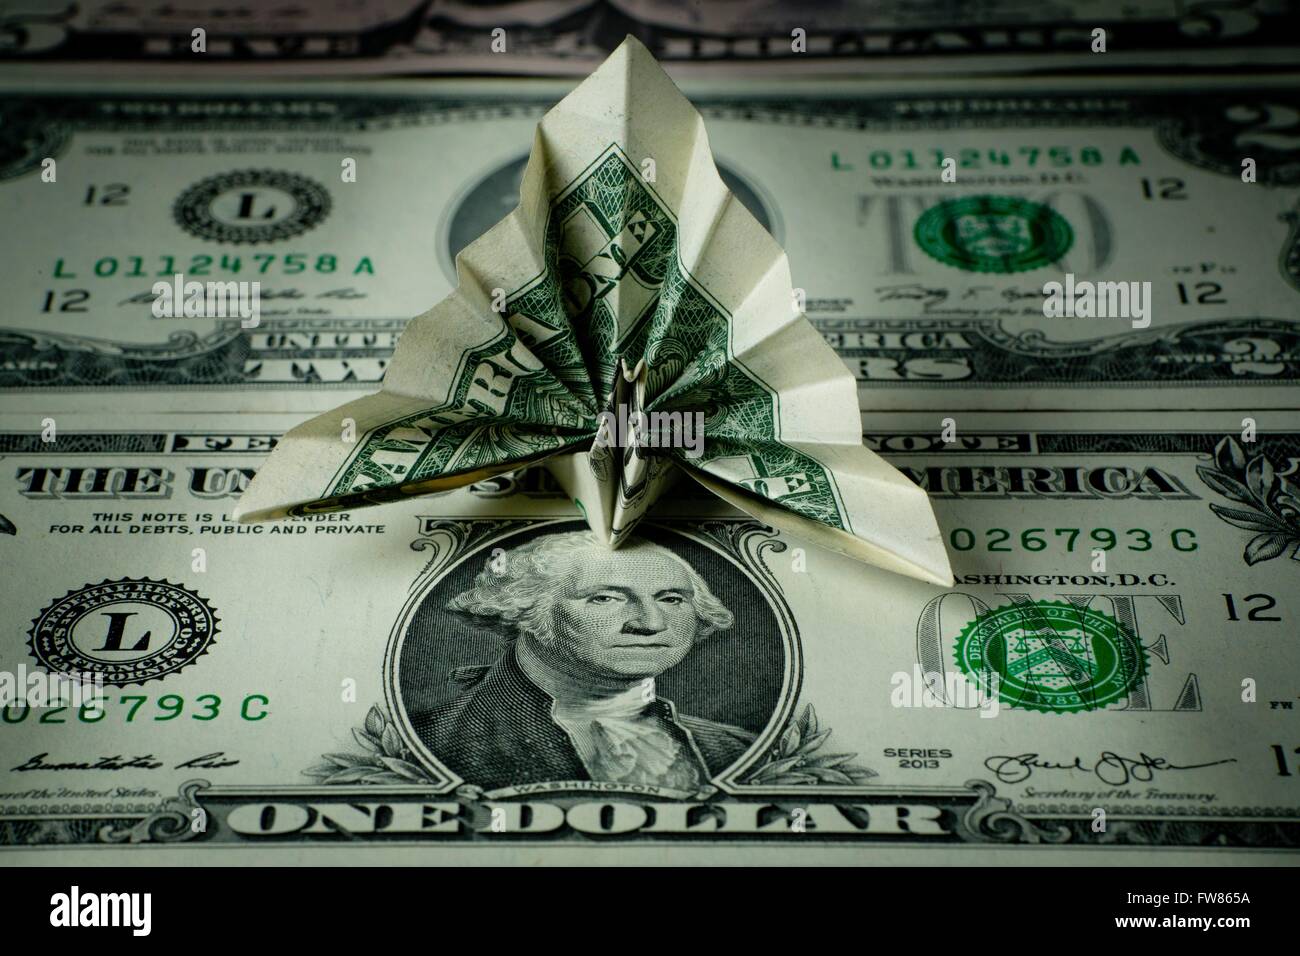 Origami peacock made of a dollar bill, sitting on dollar bills, in March 2016. Stock Photo